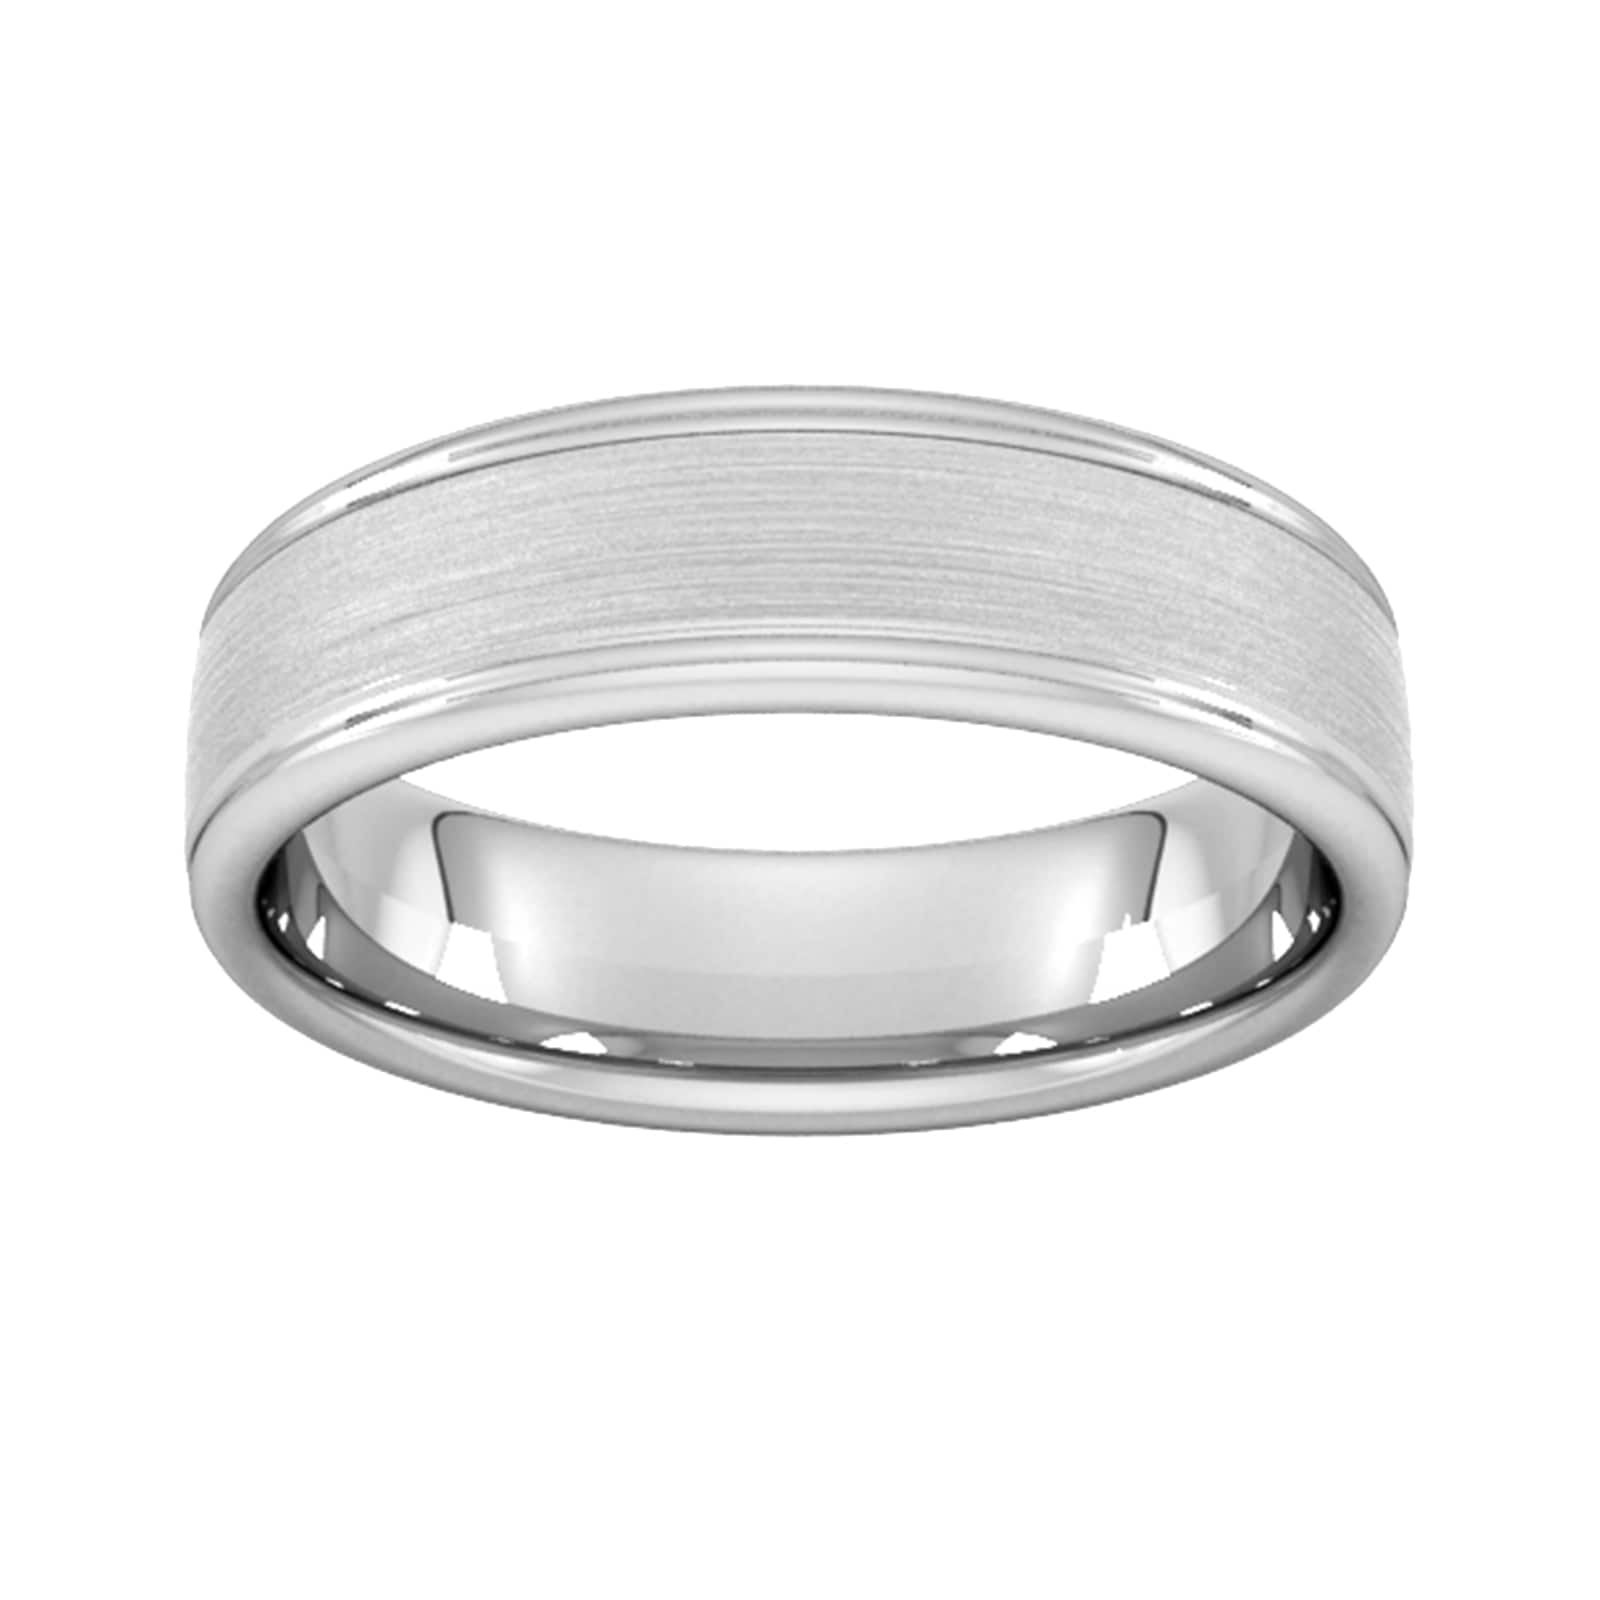 6mm Slight Court Extra Heavy Matt Centre With Grooves Wedding Ring In 9 Carat White Gold - Ring Size H